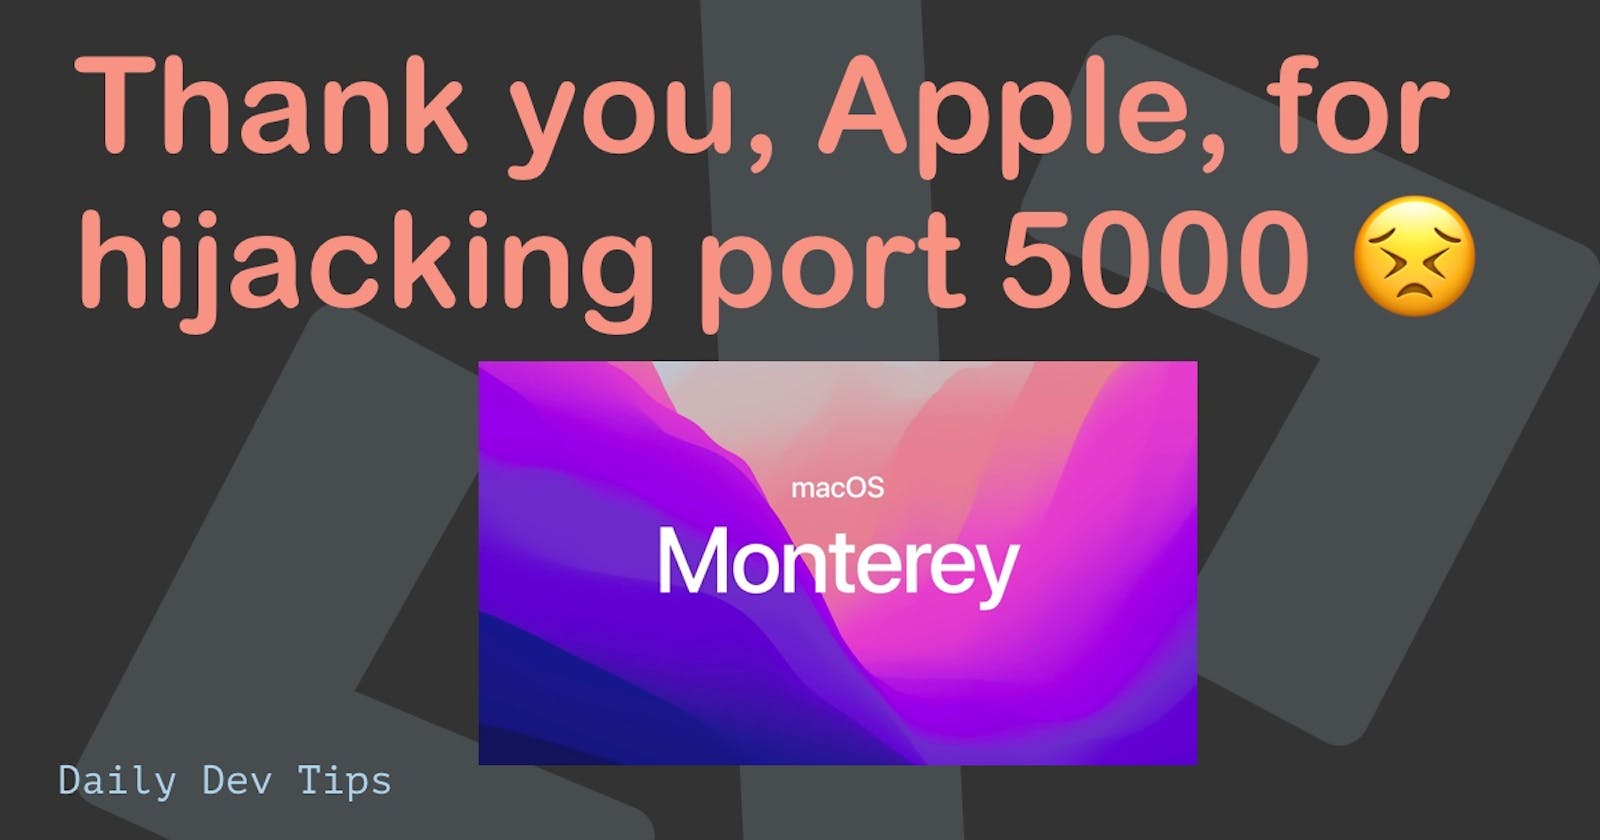 Thank you, Apple, for hijacking port 5000 😣